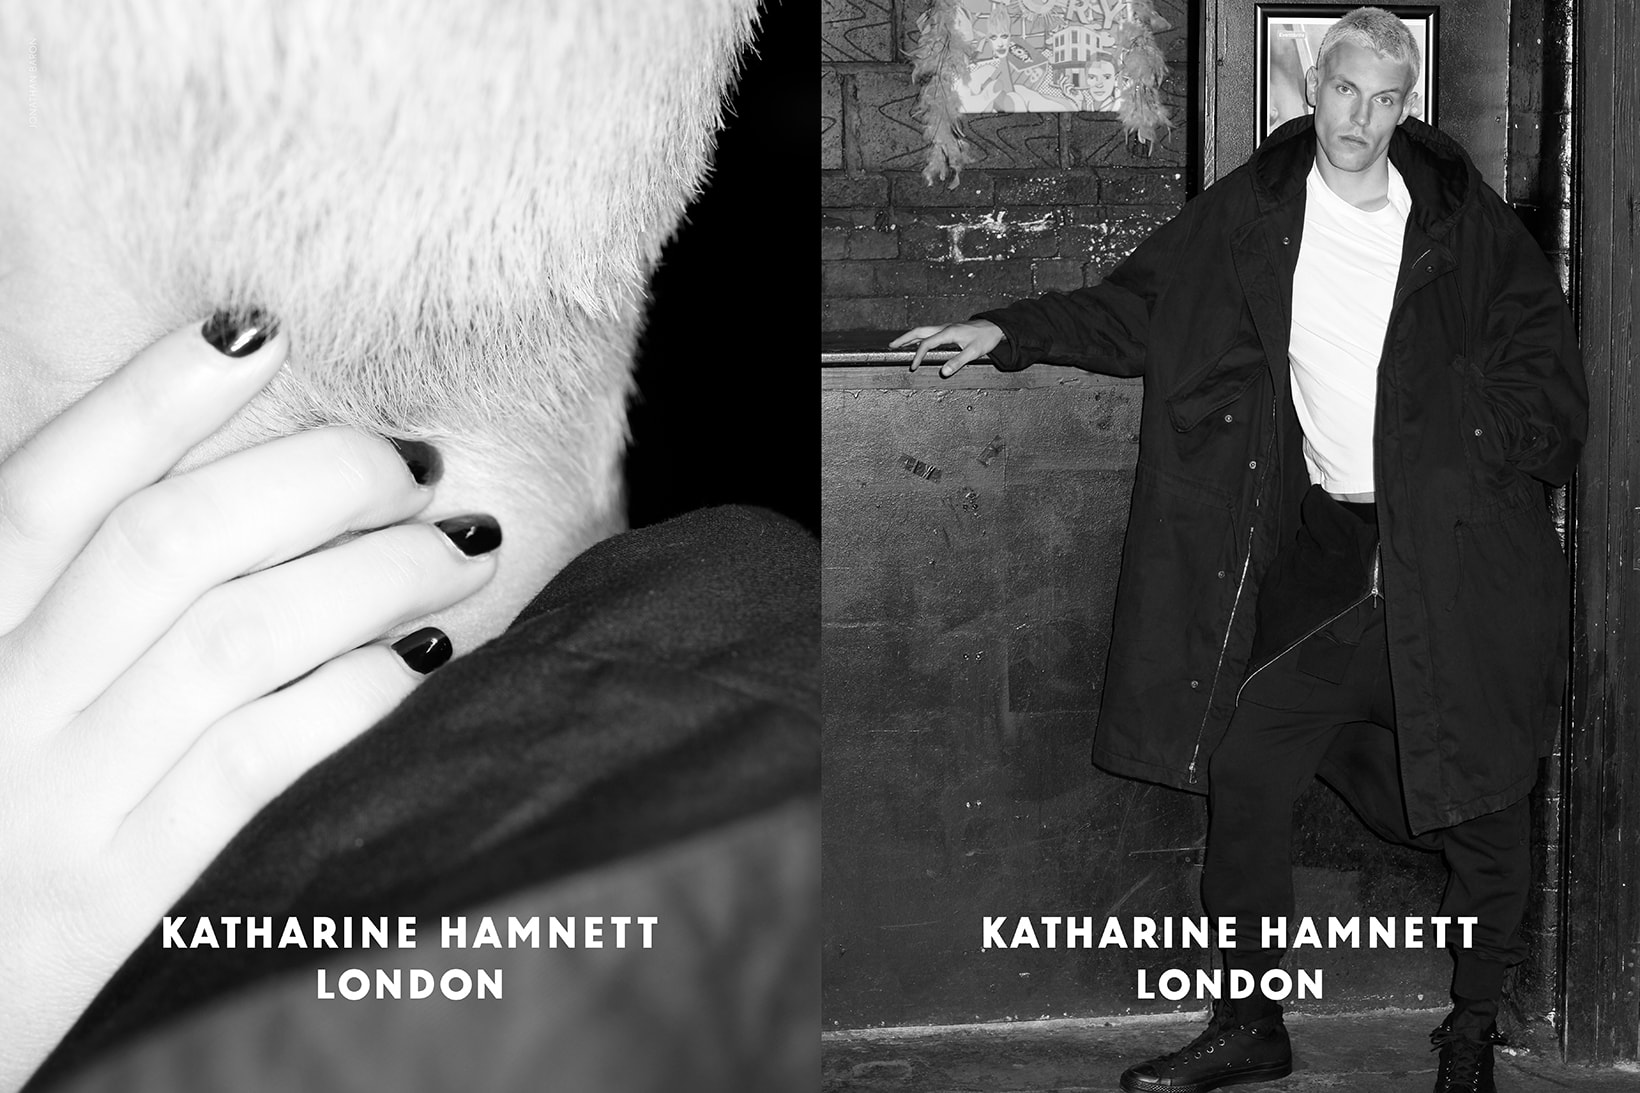 Katharine Hamnett Fall/Winter 2017 Menswear Interview Relaunch t-shirts tees kanye west clothing style fashion designer typography slogan 58% DON'T WANT PERSHING Margaret Thatcher